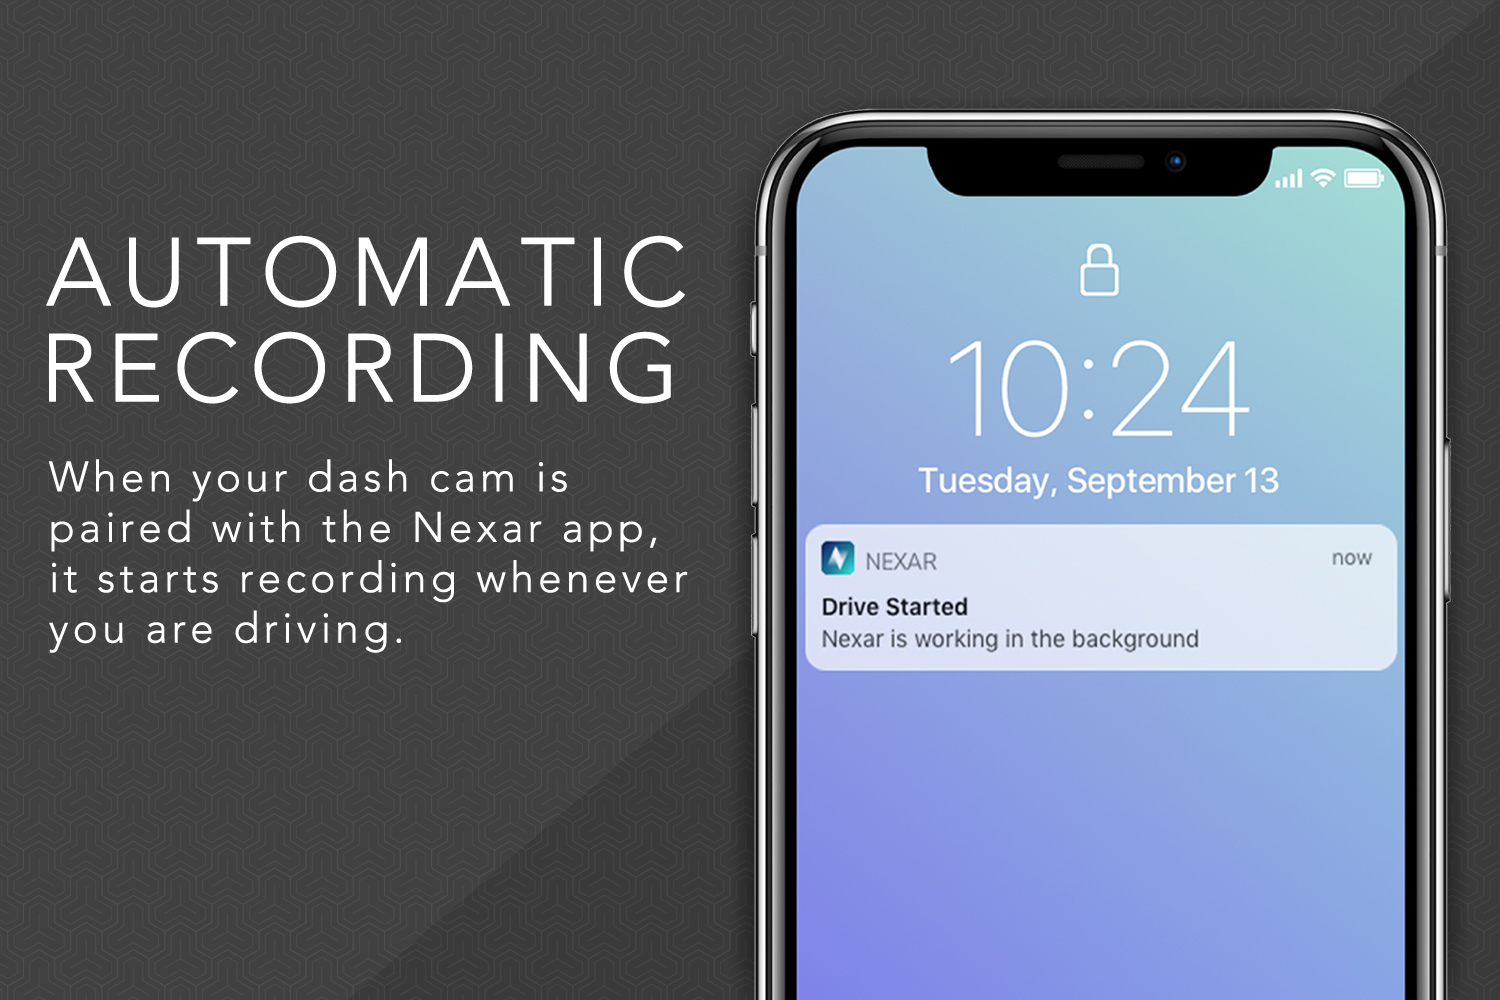 Automatic Recording, When your dash cam is paired with the Nexar app, it starts recording whenever you are driving.